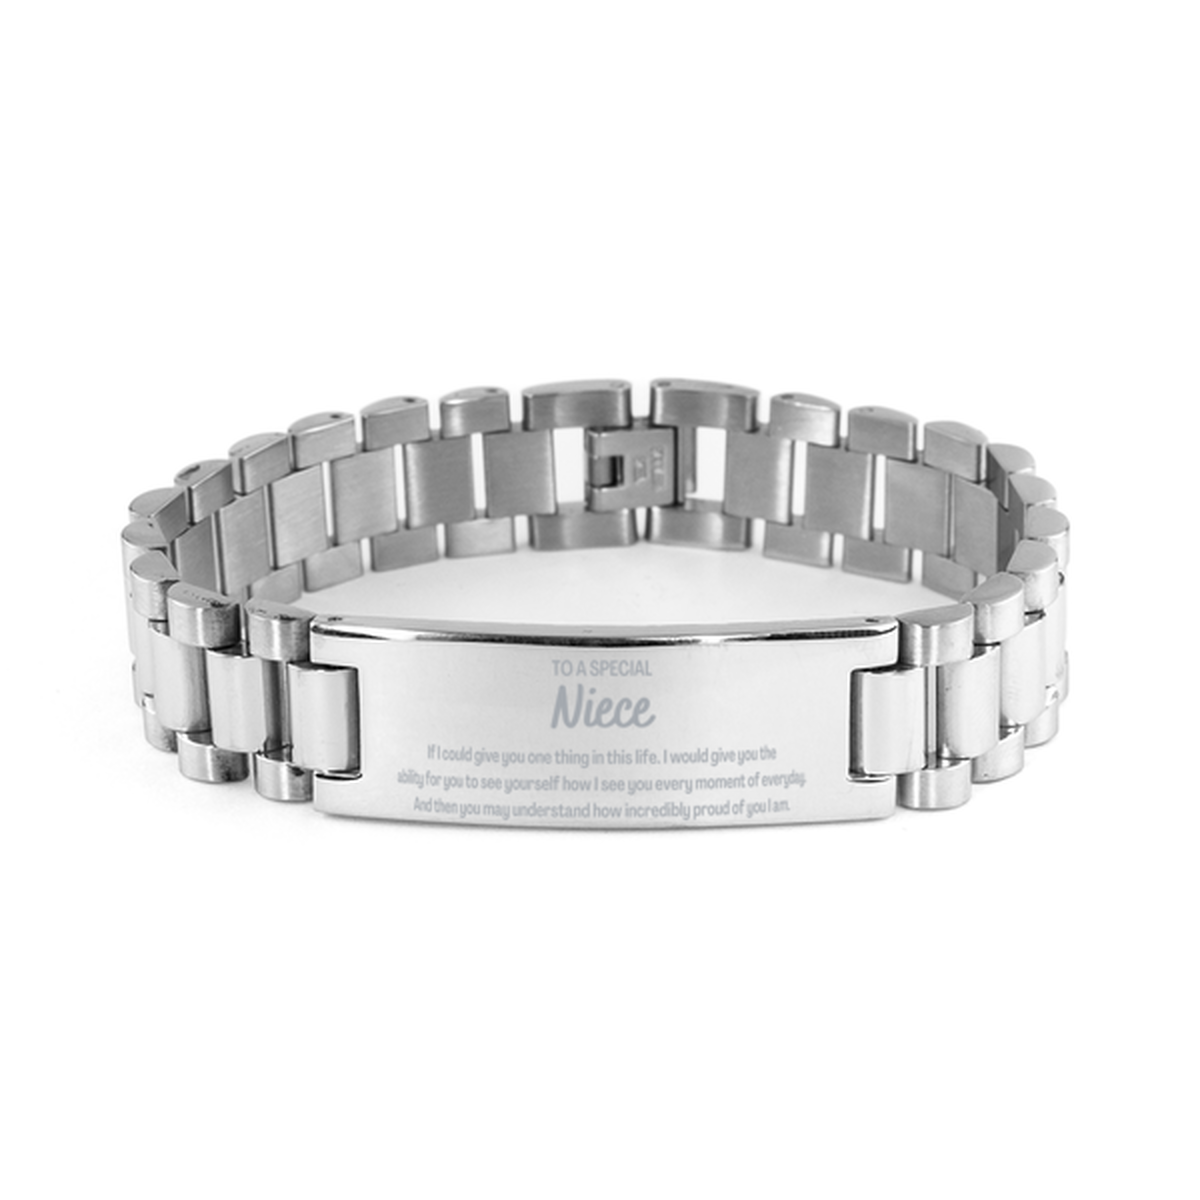 To My Niece Ladder Stainless Steel Bracelet, Gifts For Niece Engraved, Inspirational Gifts for Christmas Birthday, Epic Gifts for Niece To A Special Niece how incredibly proud of you I am